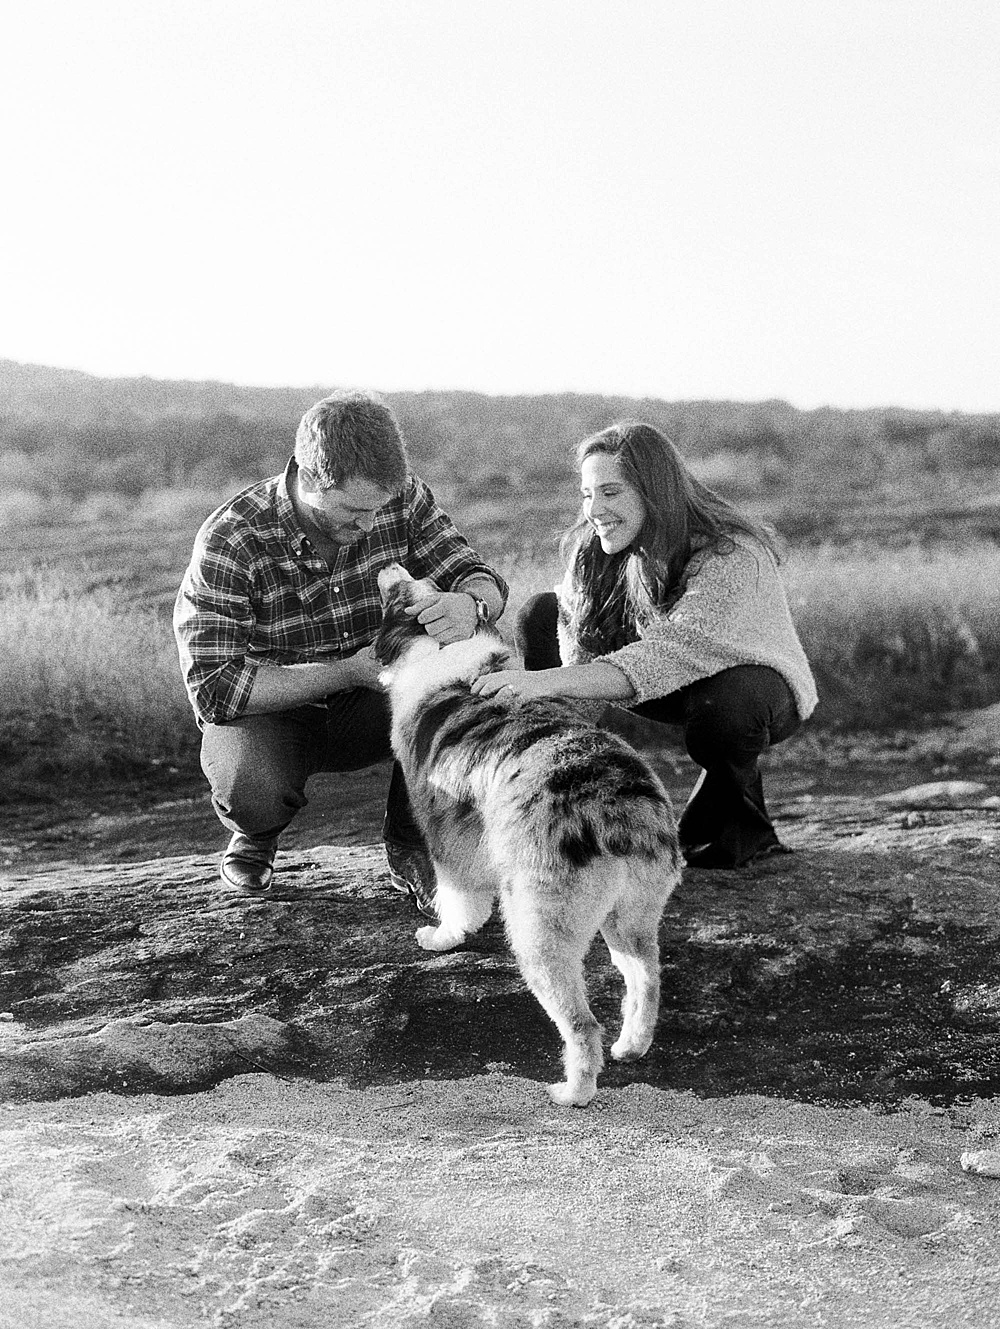 Black and white engagement photo on Arabia Mountain at sunset